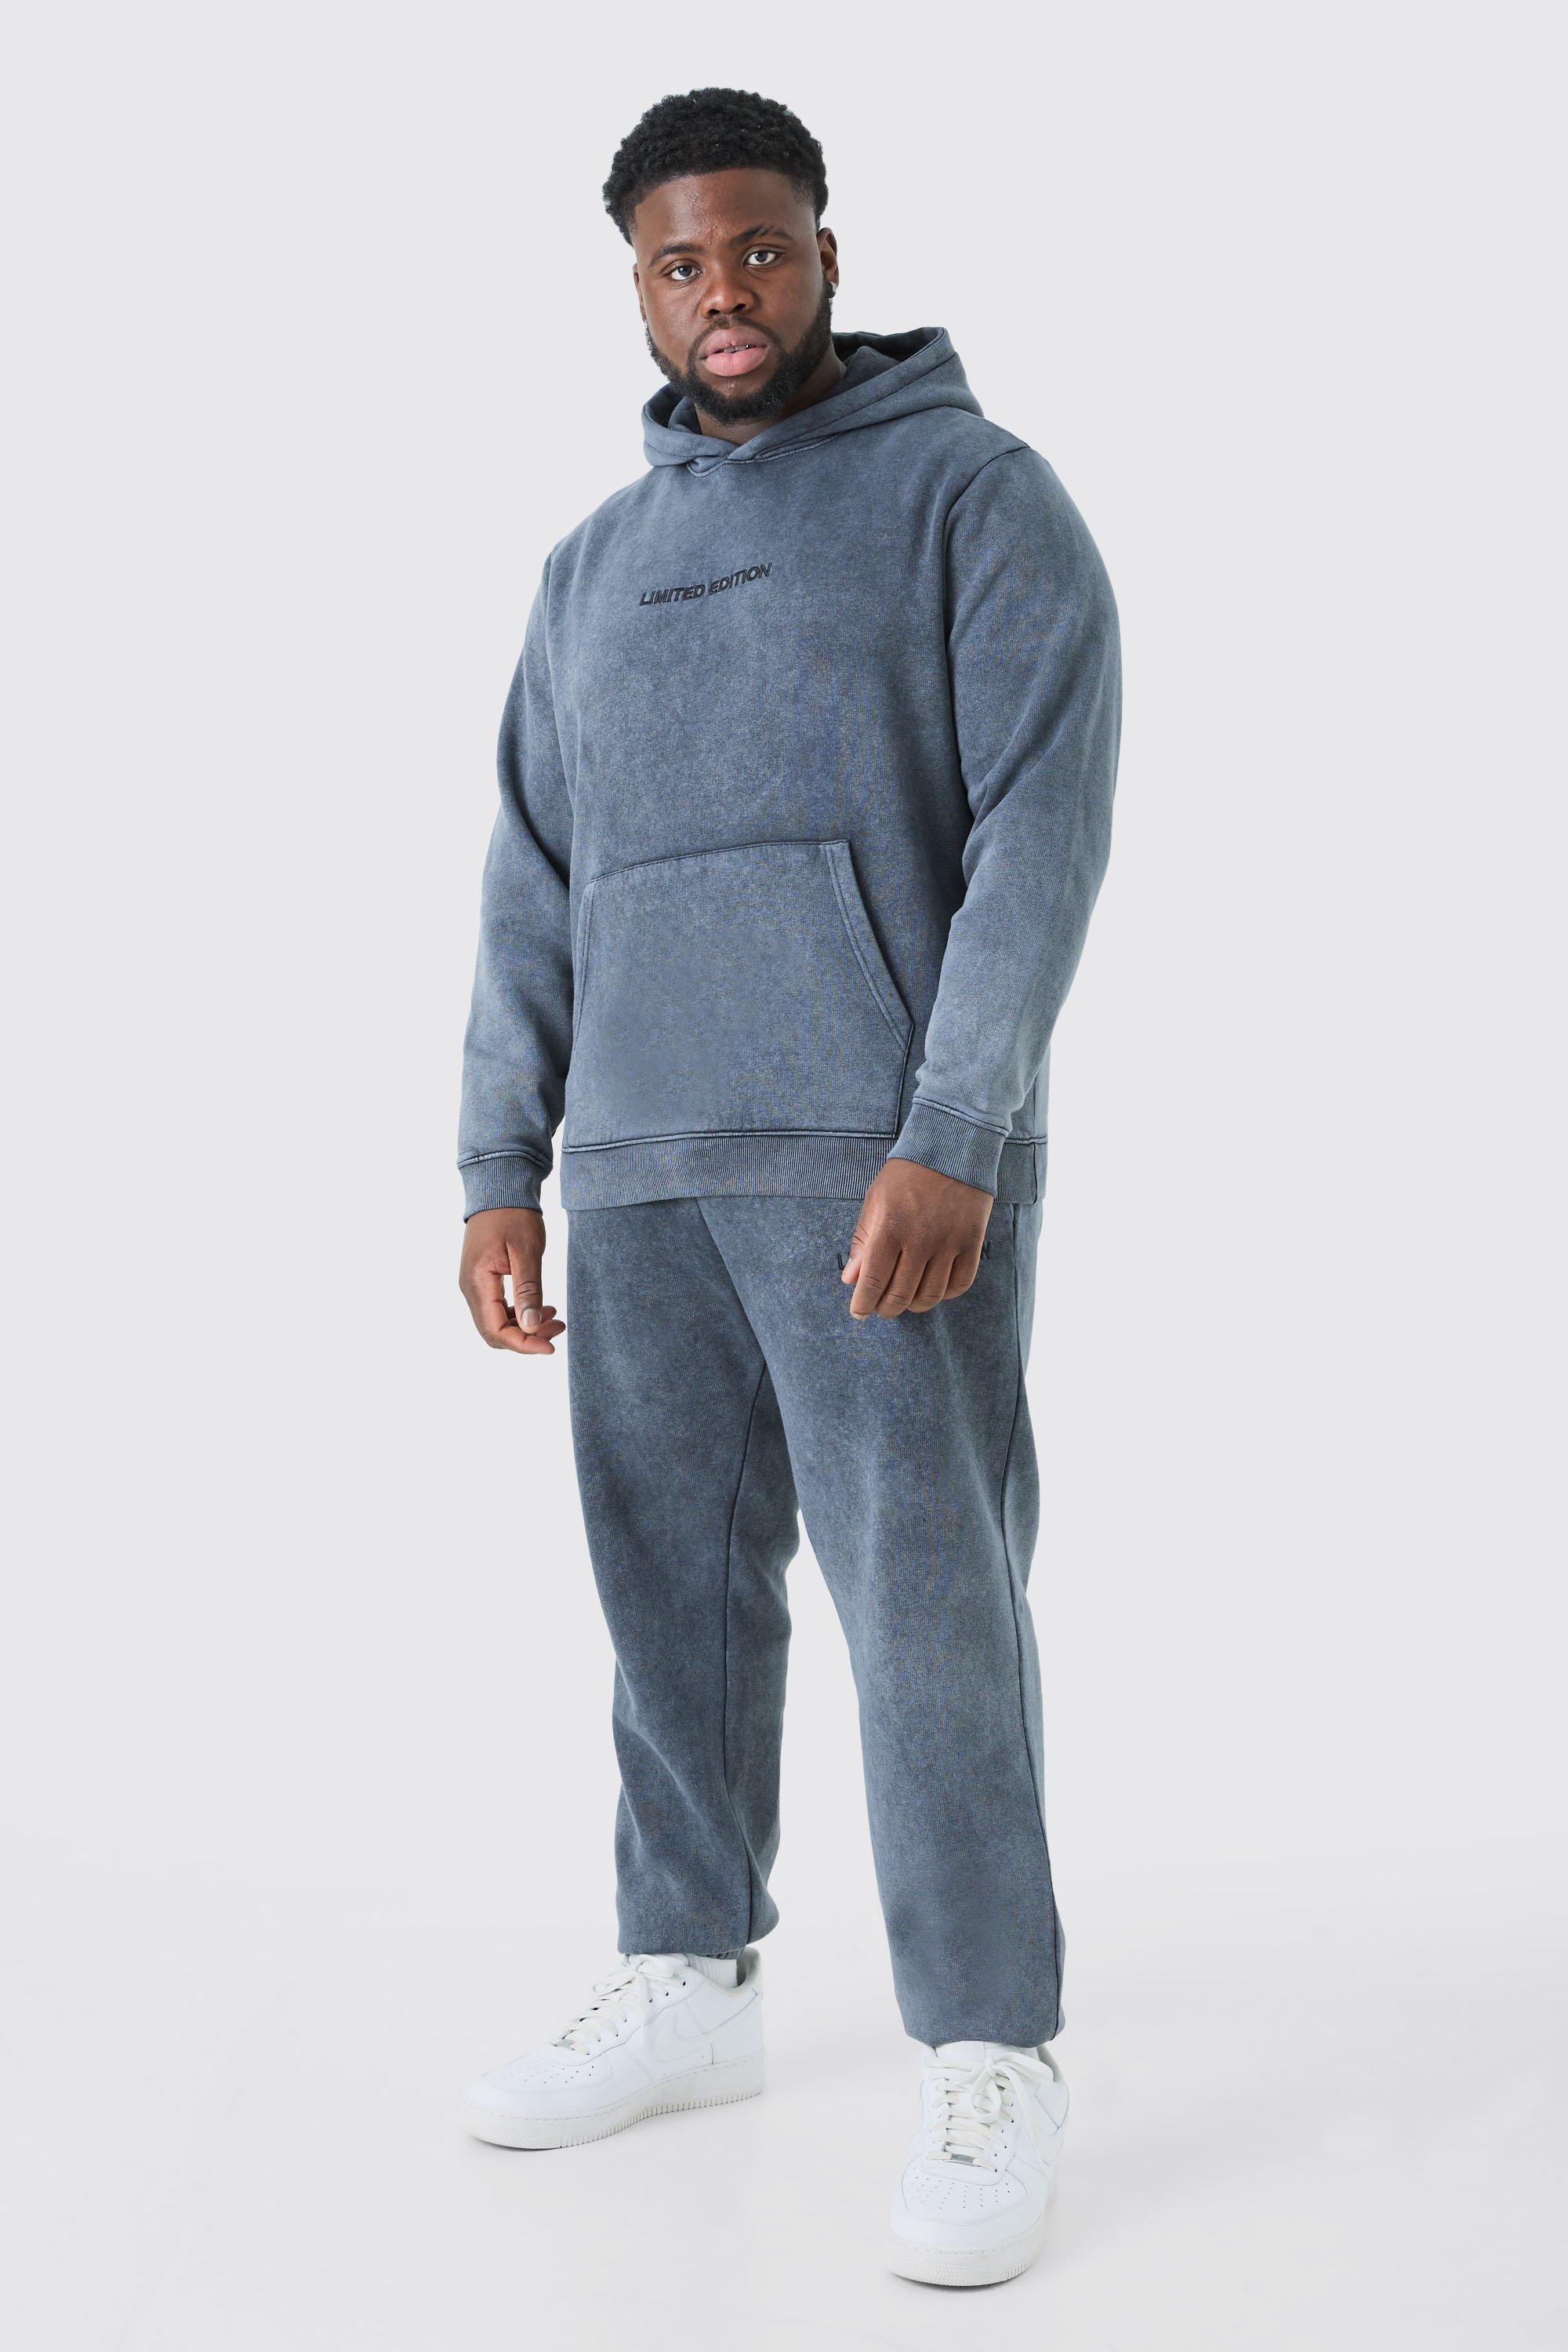 Big & Tall Tracksuits, Tracksuits For Tall Men